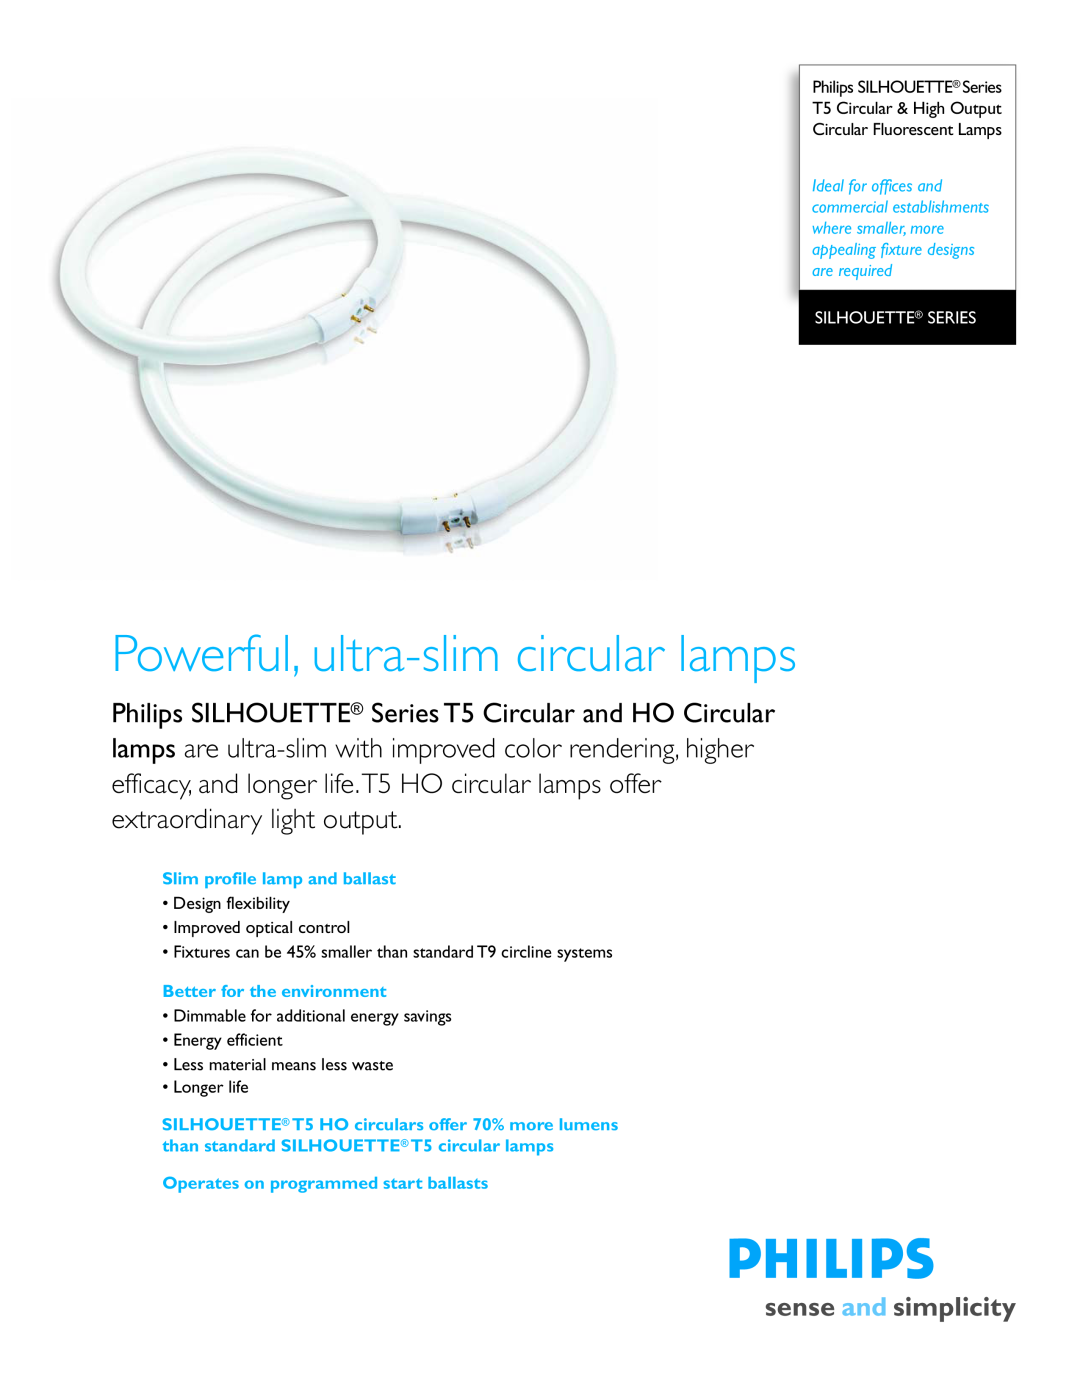 Philips SILHOUETTE Series manual Powerful, ultra-slim circular lamps, Silhouette Series, Slim profile lamp and ballast 